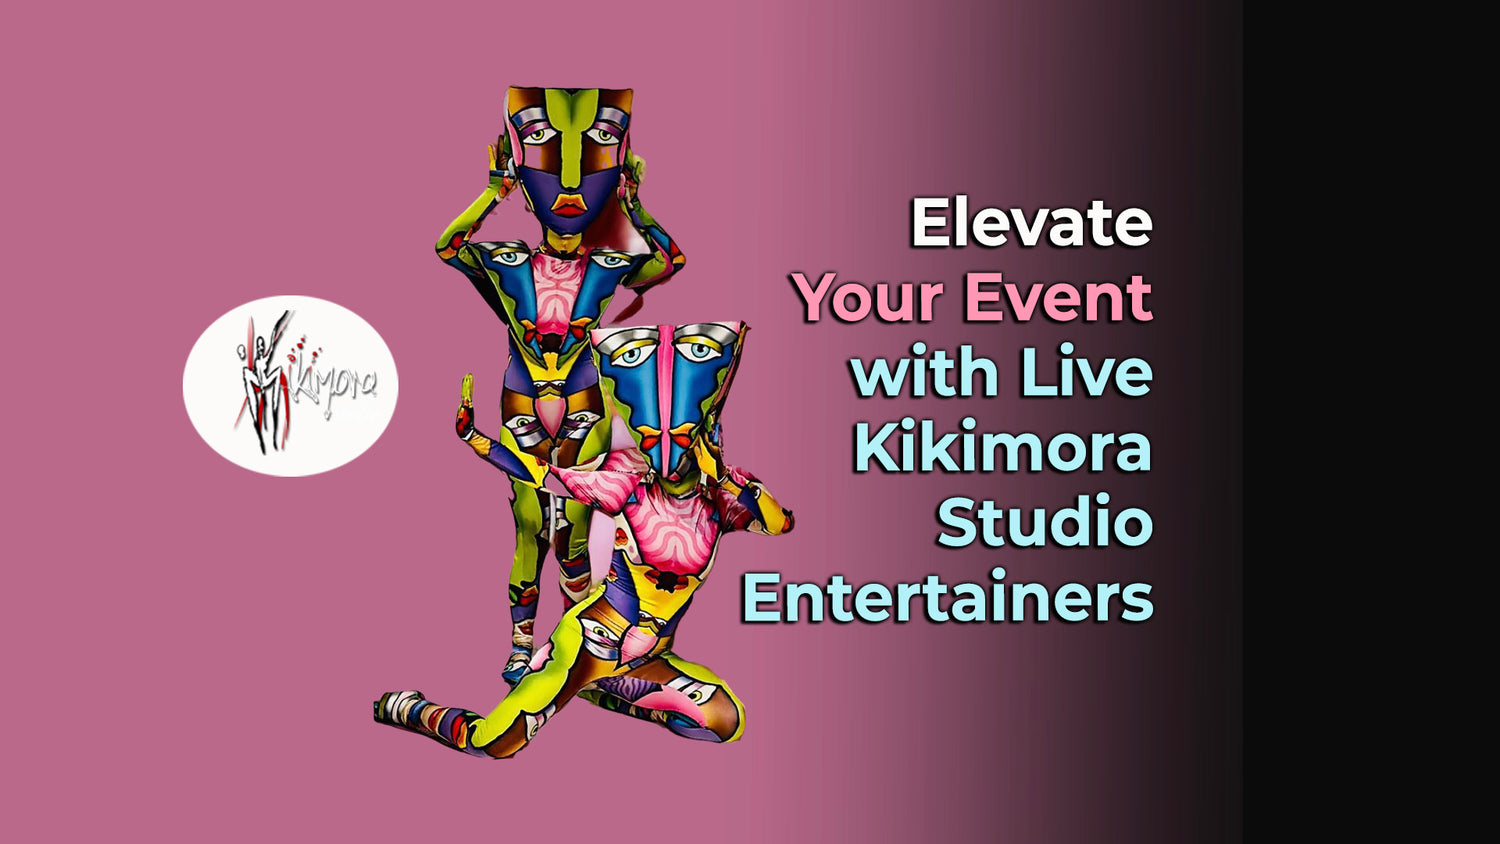 Elevate Your Event with Live Kikimora Studio Entertainers